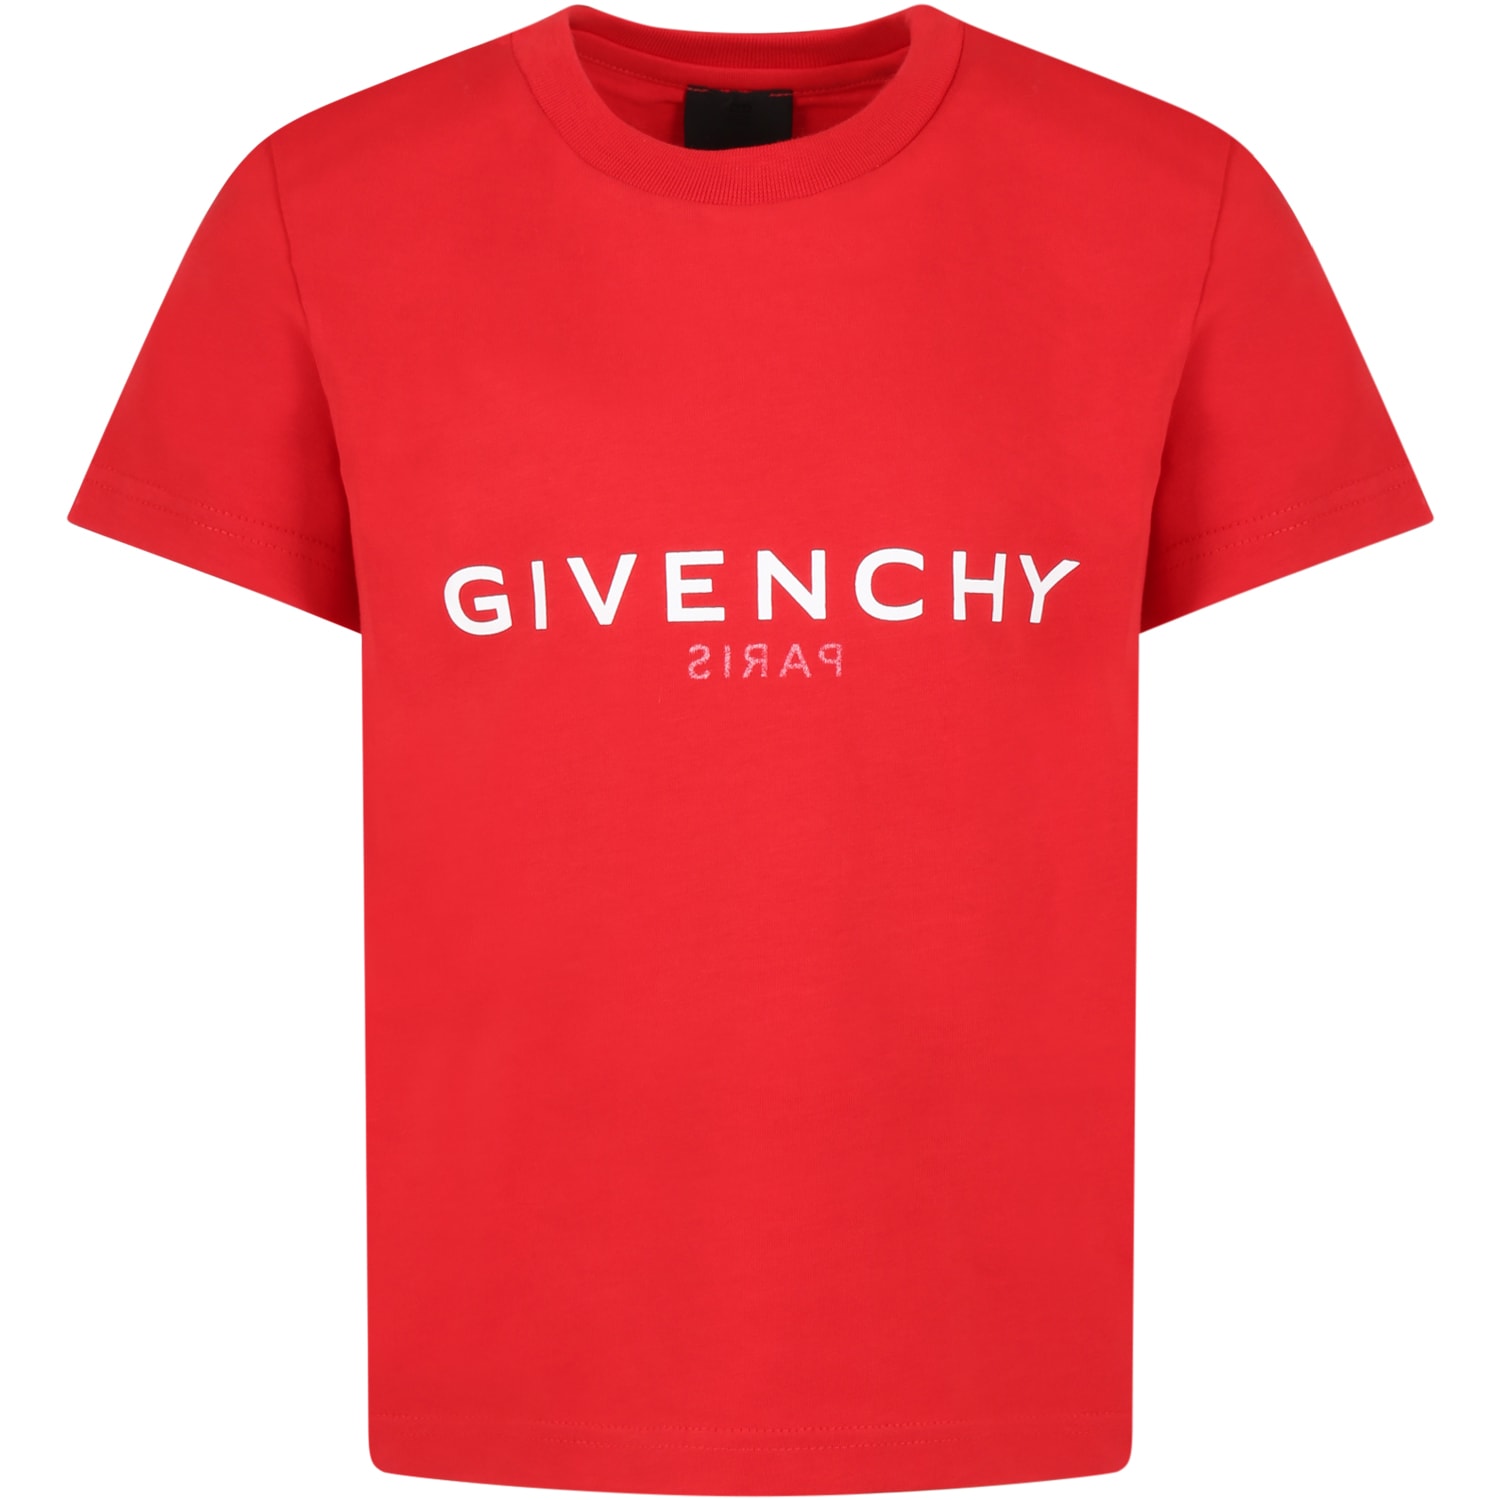 Givenchy Red T-shirt For Kids With White Logo